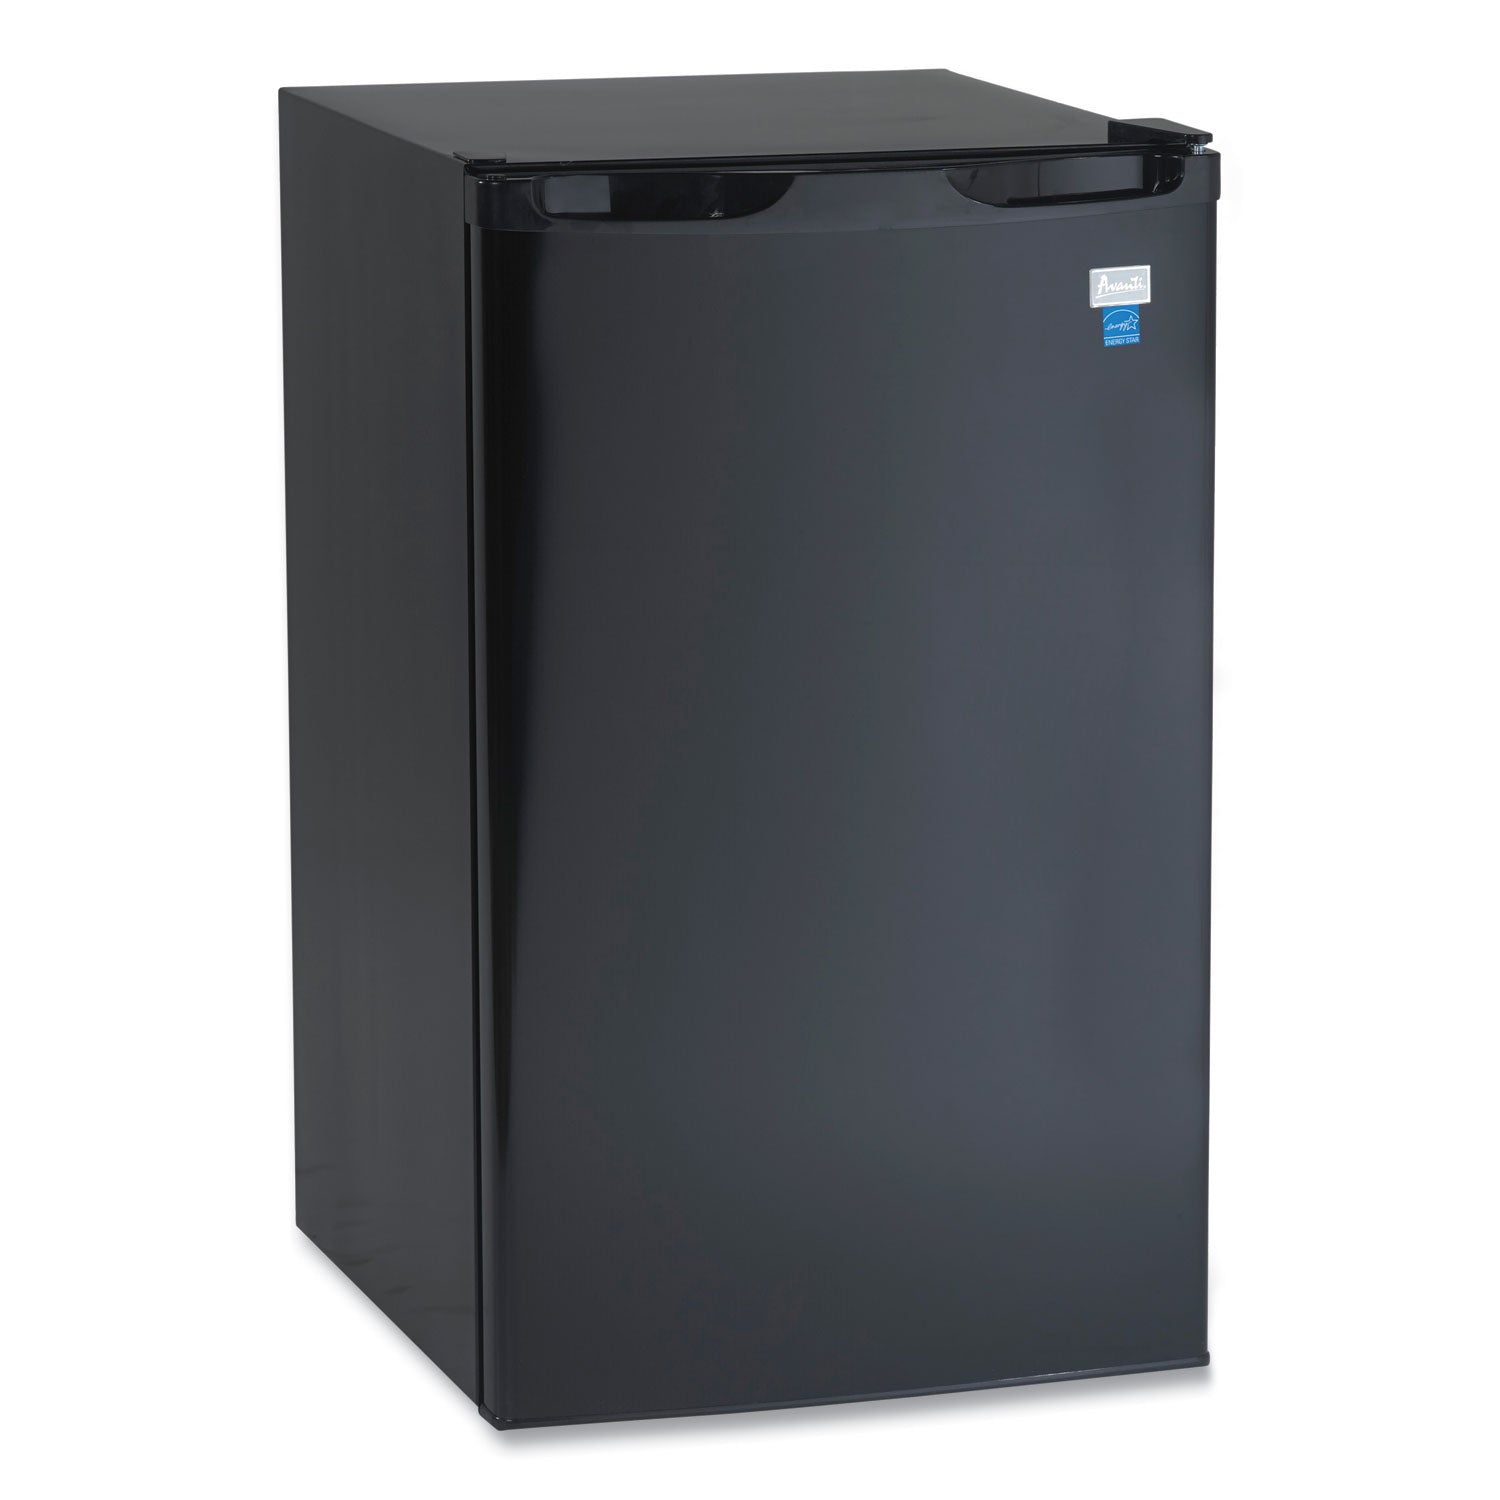 3.3 Cu.Ft Refrigerator with Chiller Compartment, Black - 